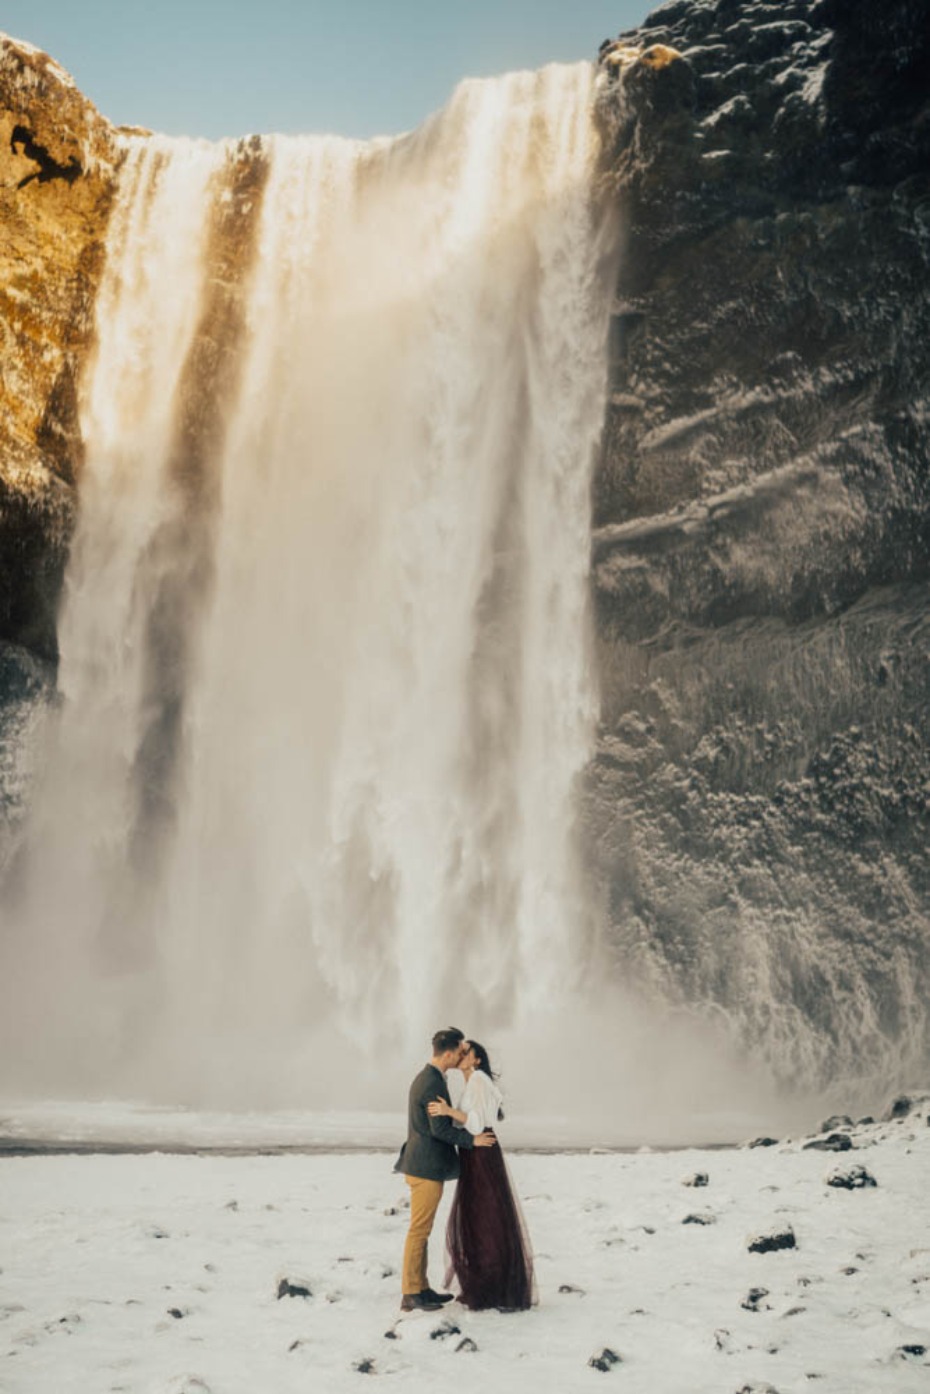 Dreamy elopement in Iceland